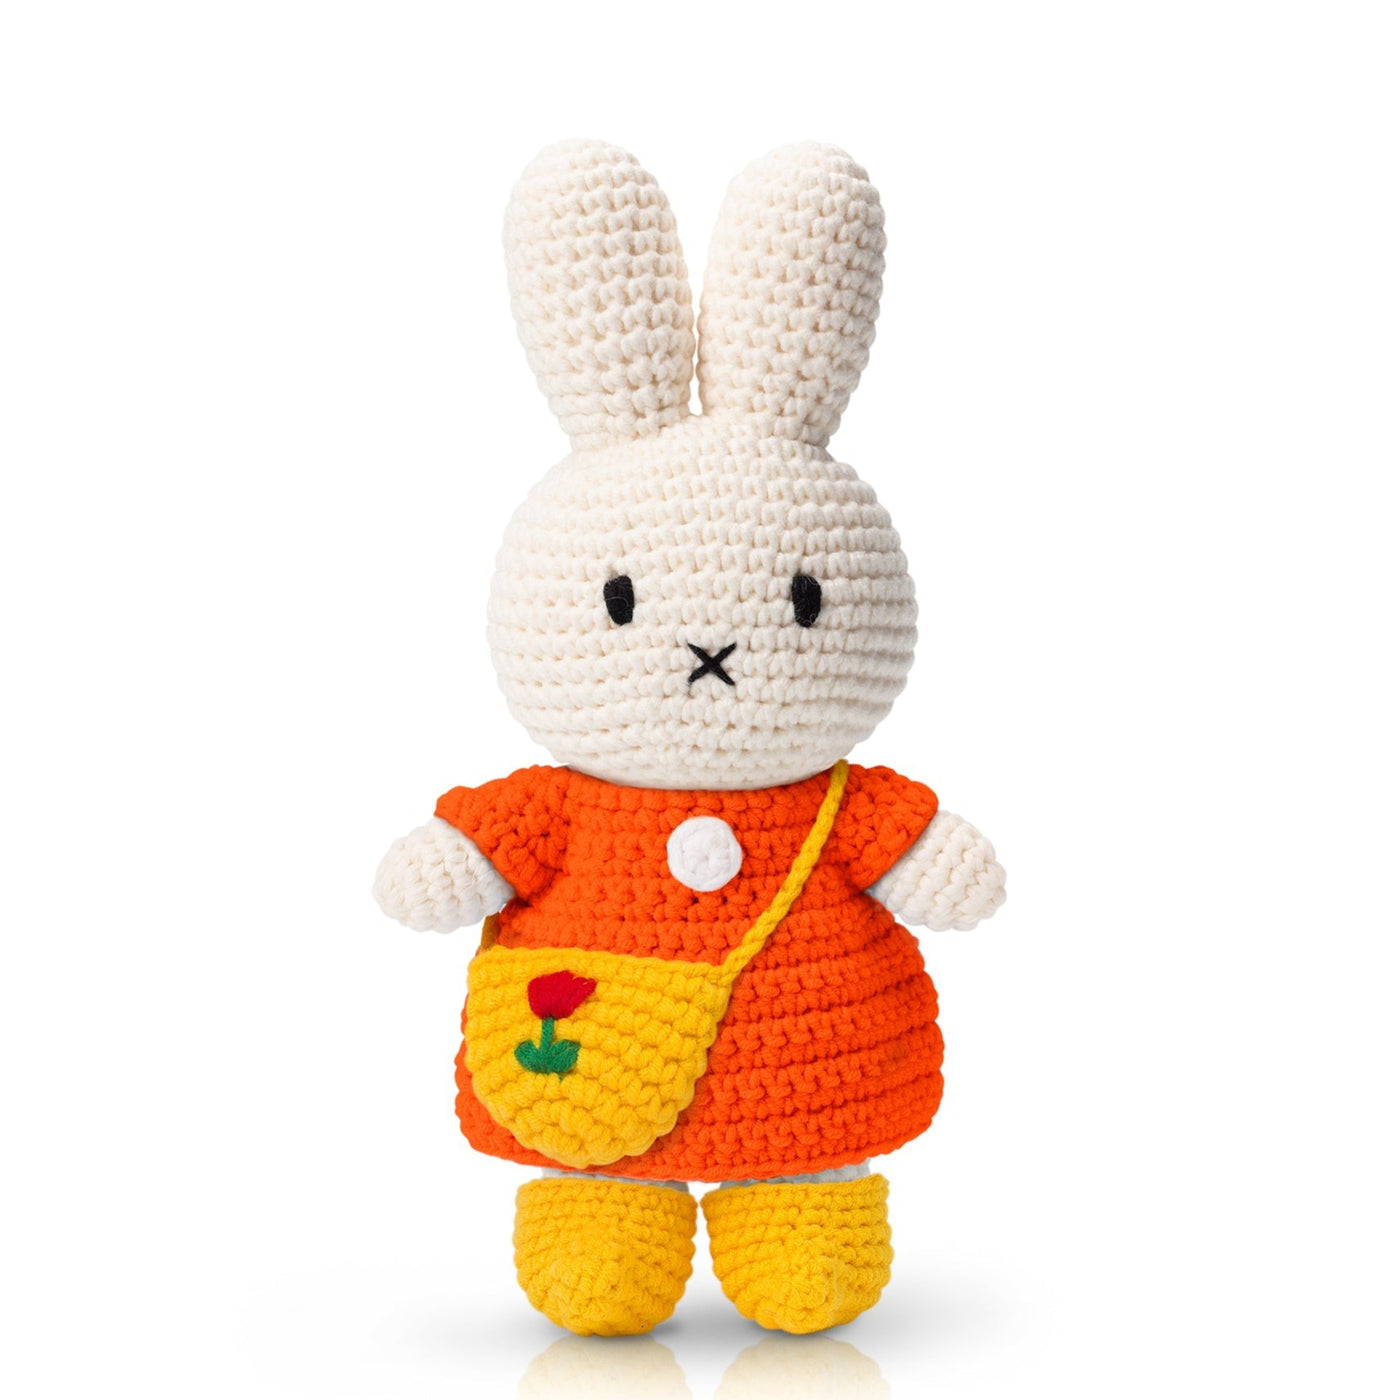 Crocheted Miffy with Tulip Bag & Shoes